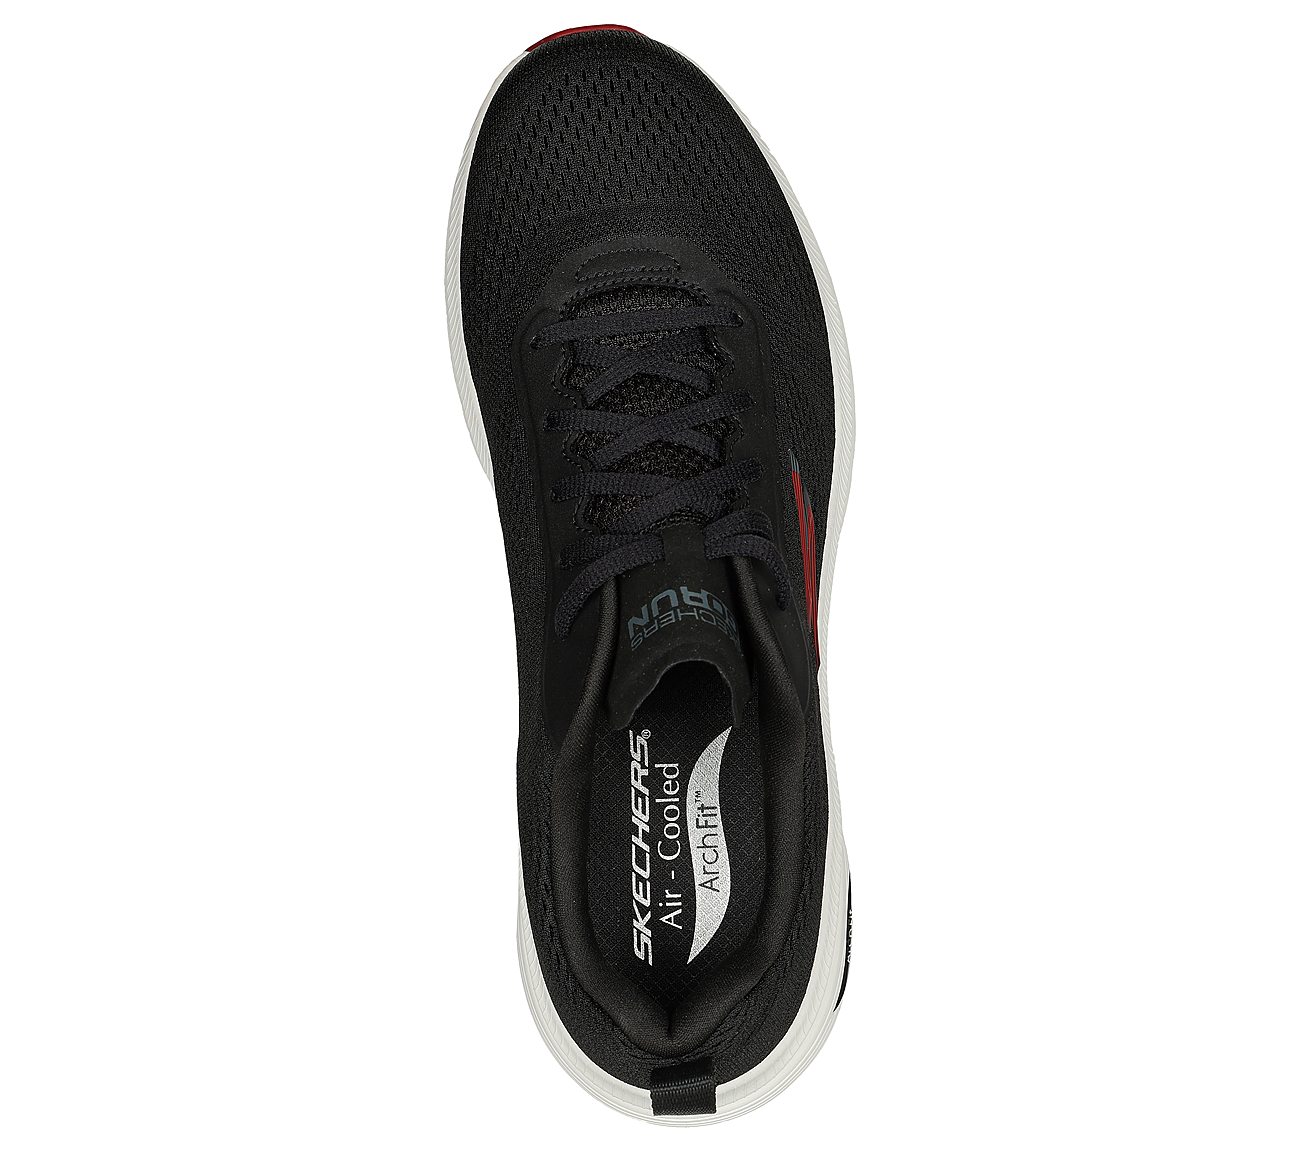 Skechers Black/Red Go Run Arch Fit Mens Running Shoes - Style ID ...